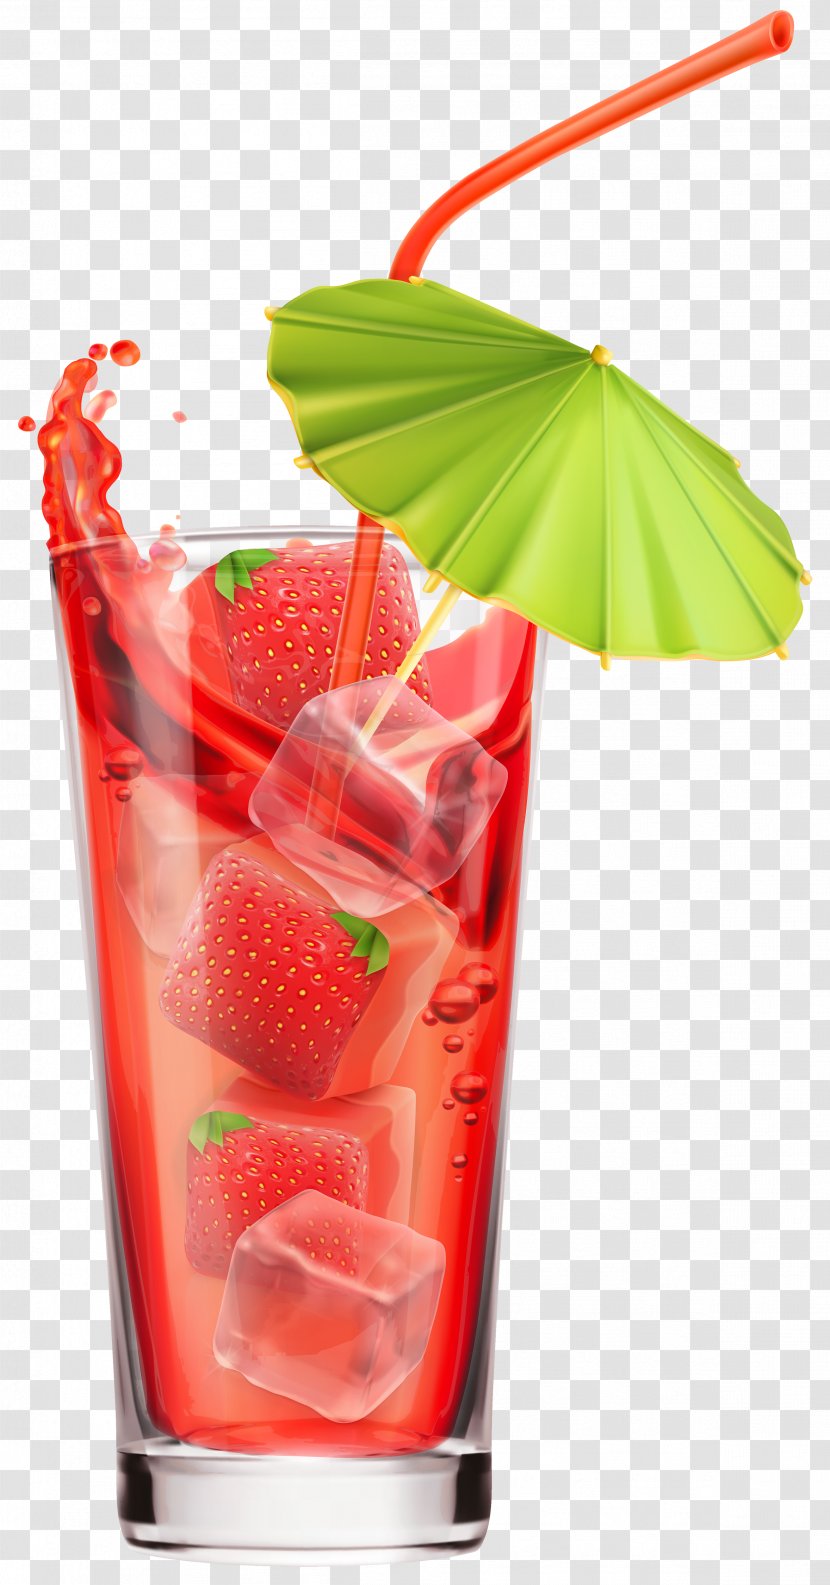 Cocktail Screwdriver Tequila Sunrise Punch Non-alcoholic Drink - Umbrella Transparent PNG